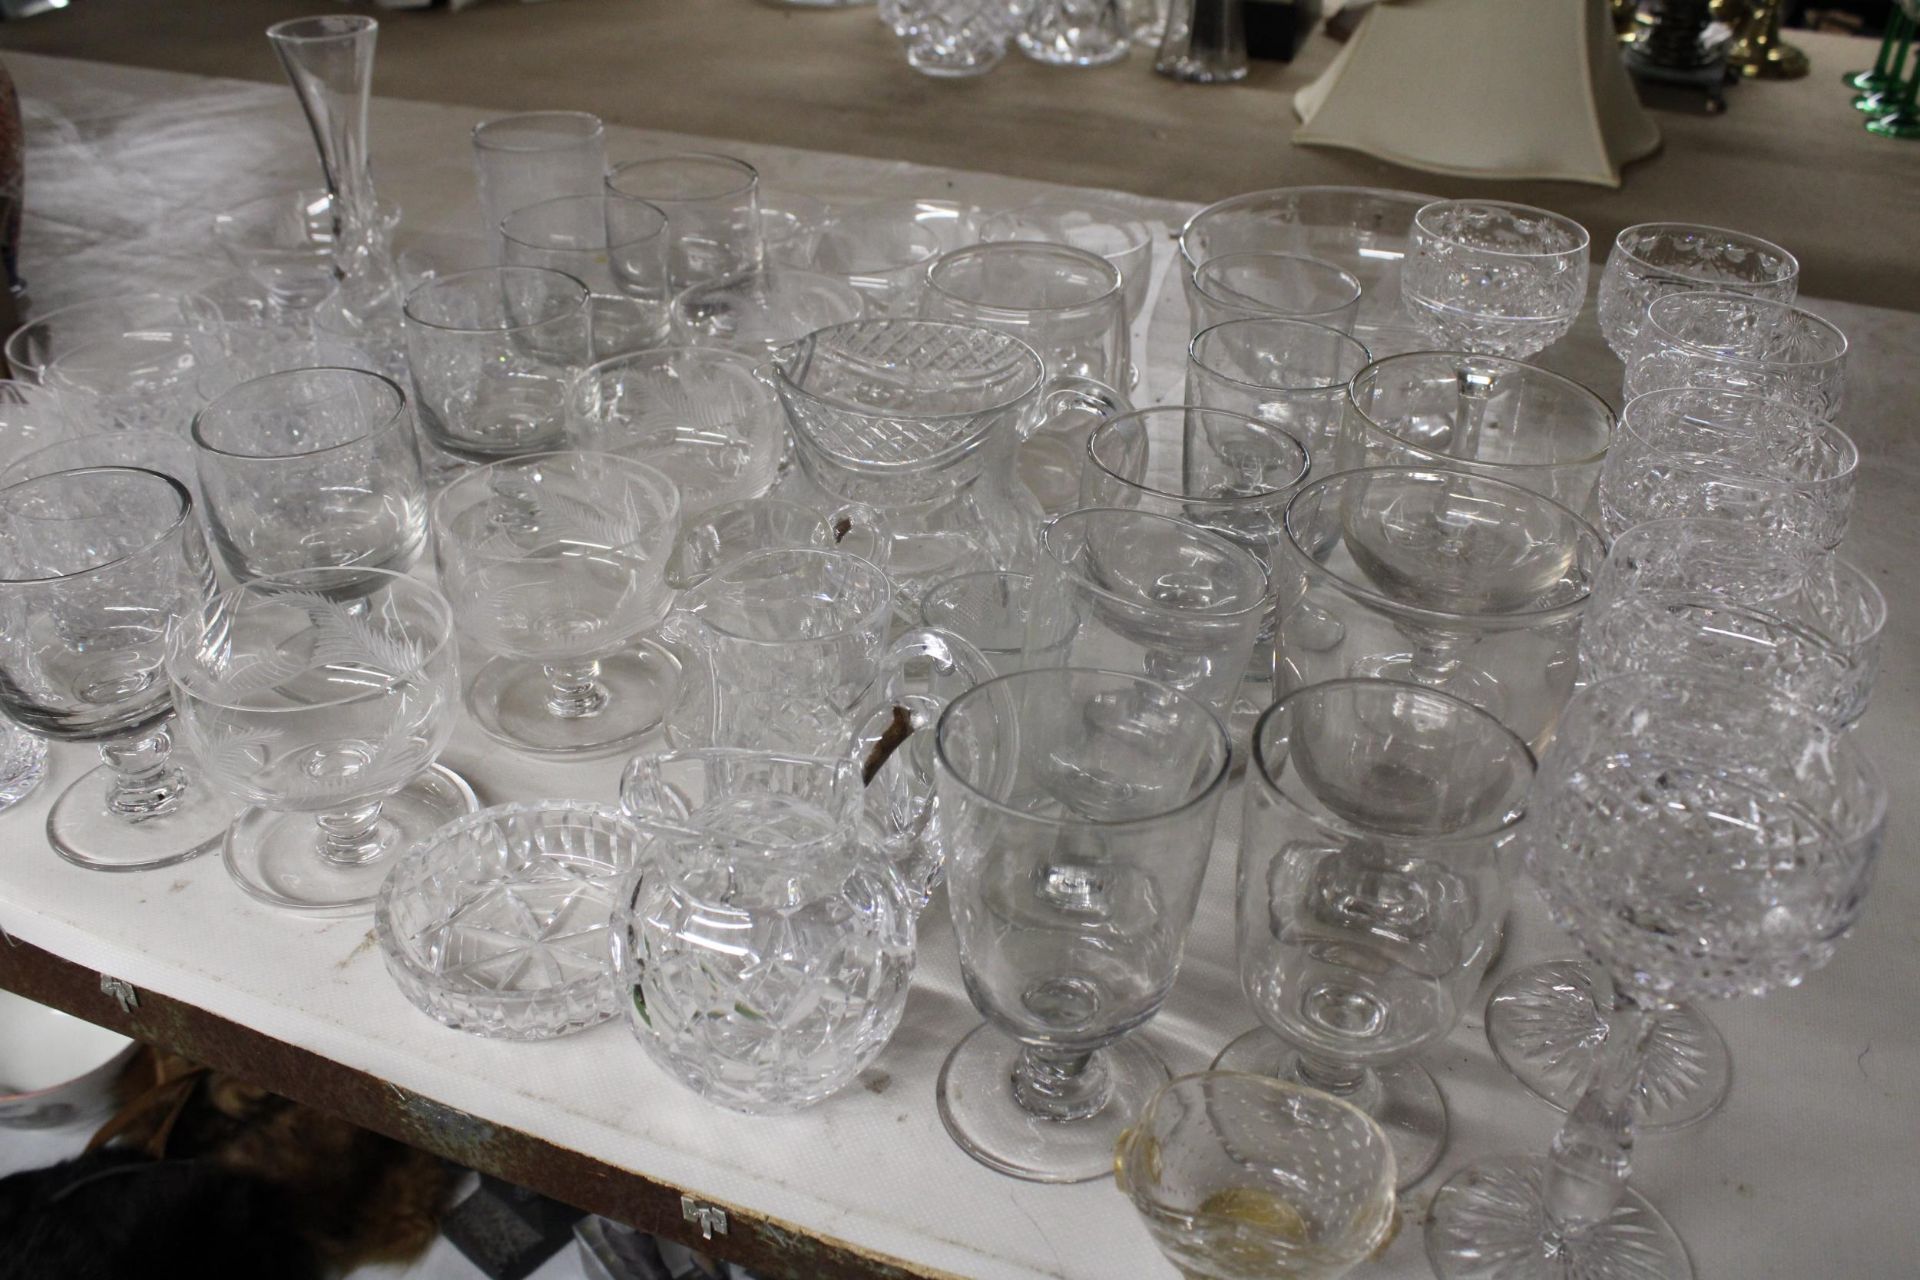 A LARGE COLLECTION OF GLASSWARE TO INCLUDE DESSERT DISHES, JUGS, WINE GLASSES ETC - Image 5 of 6